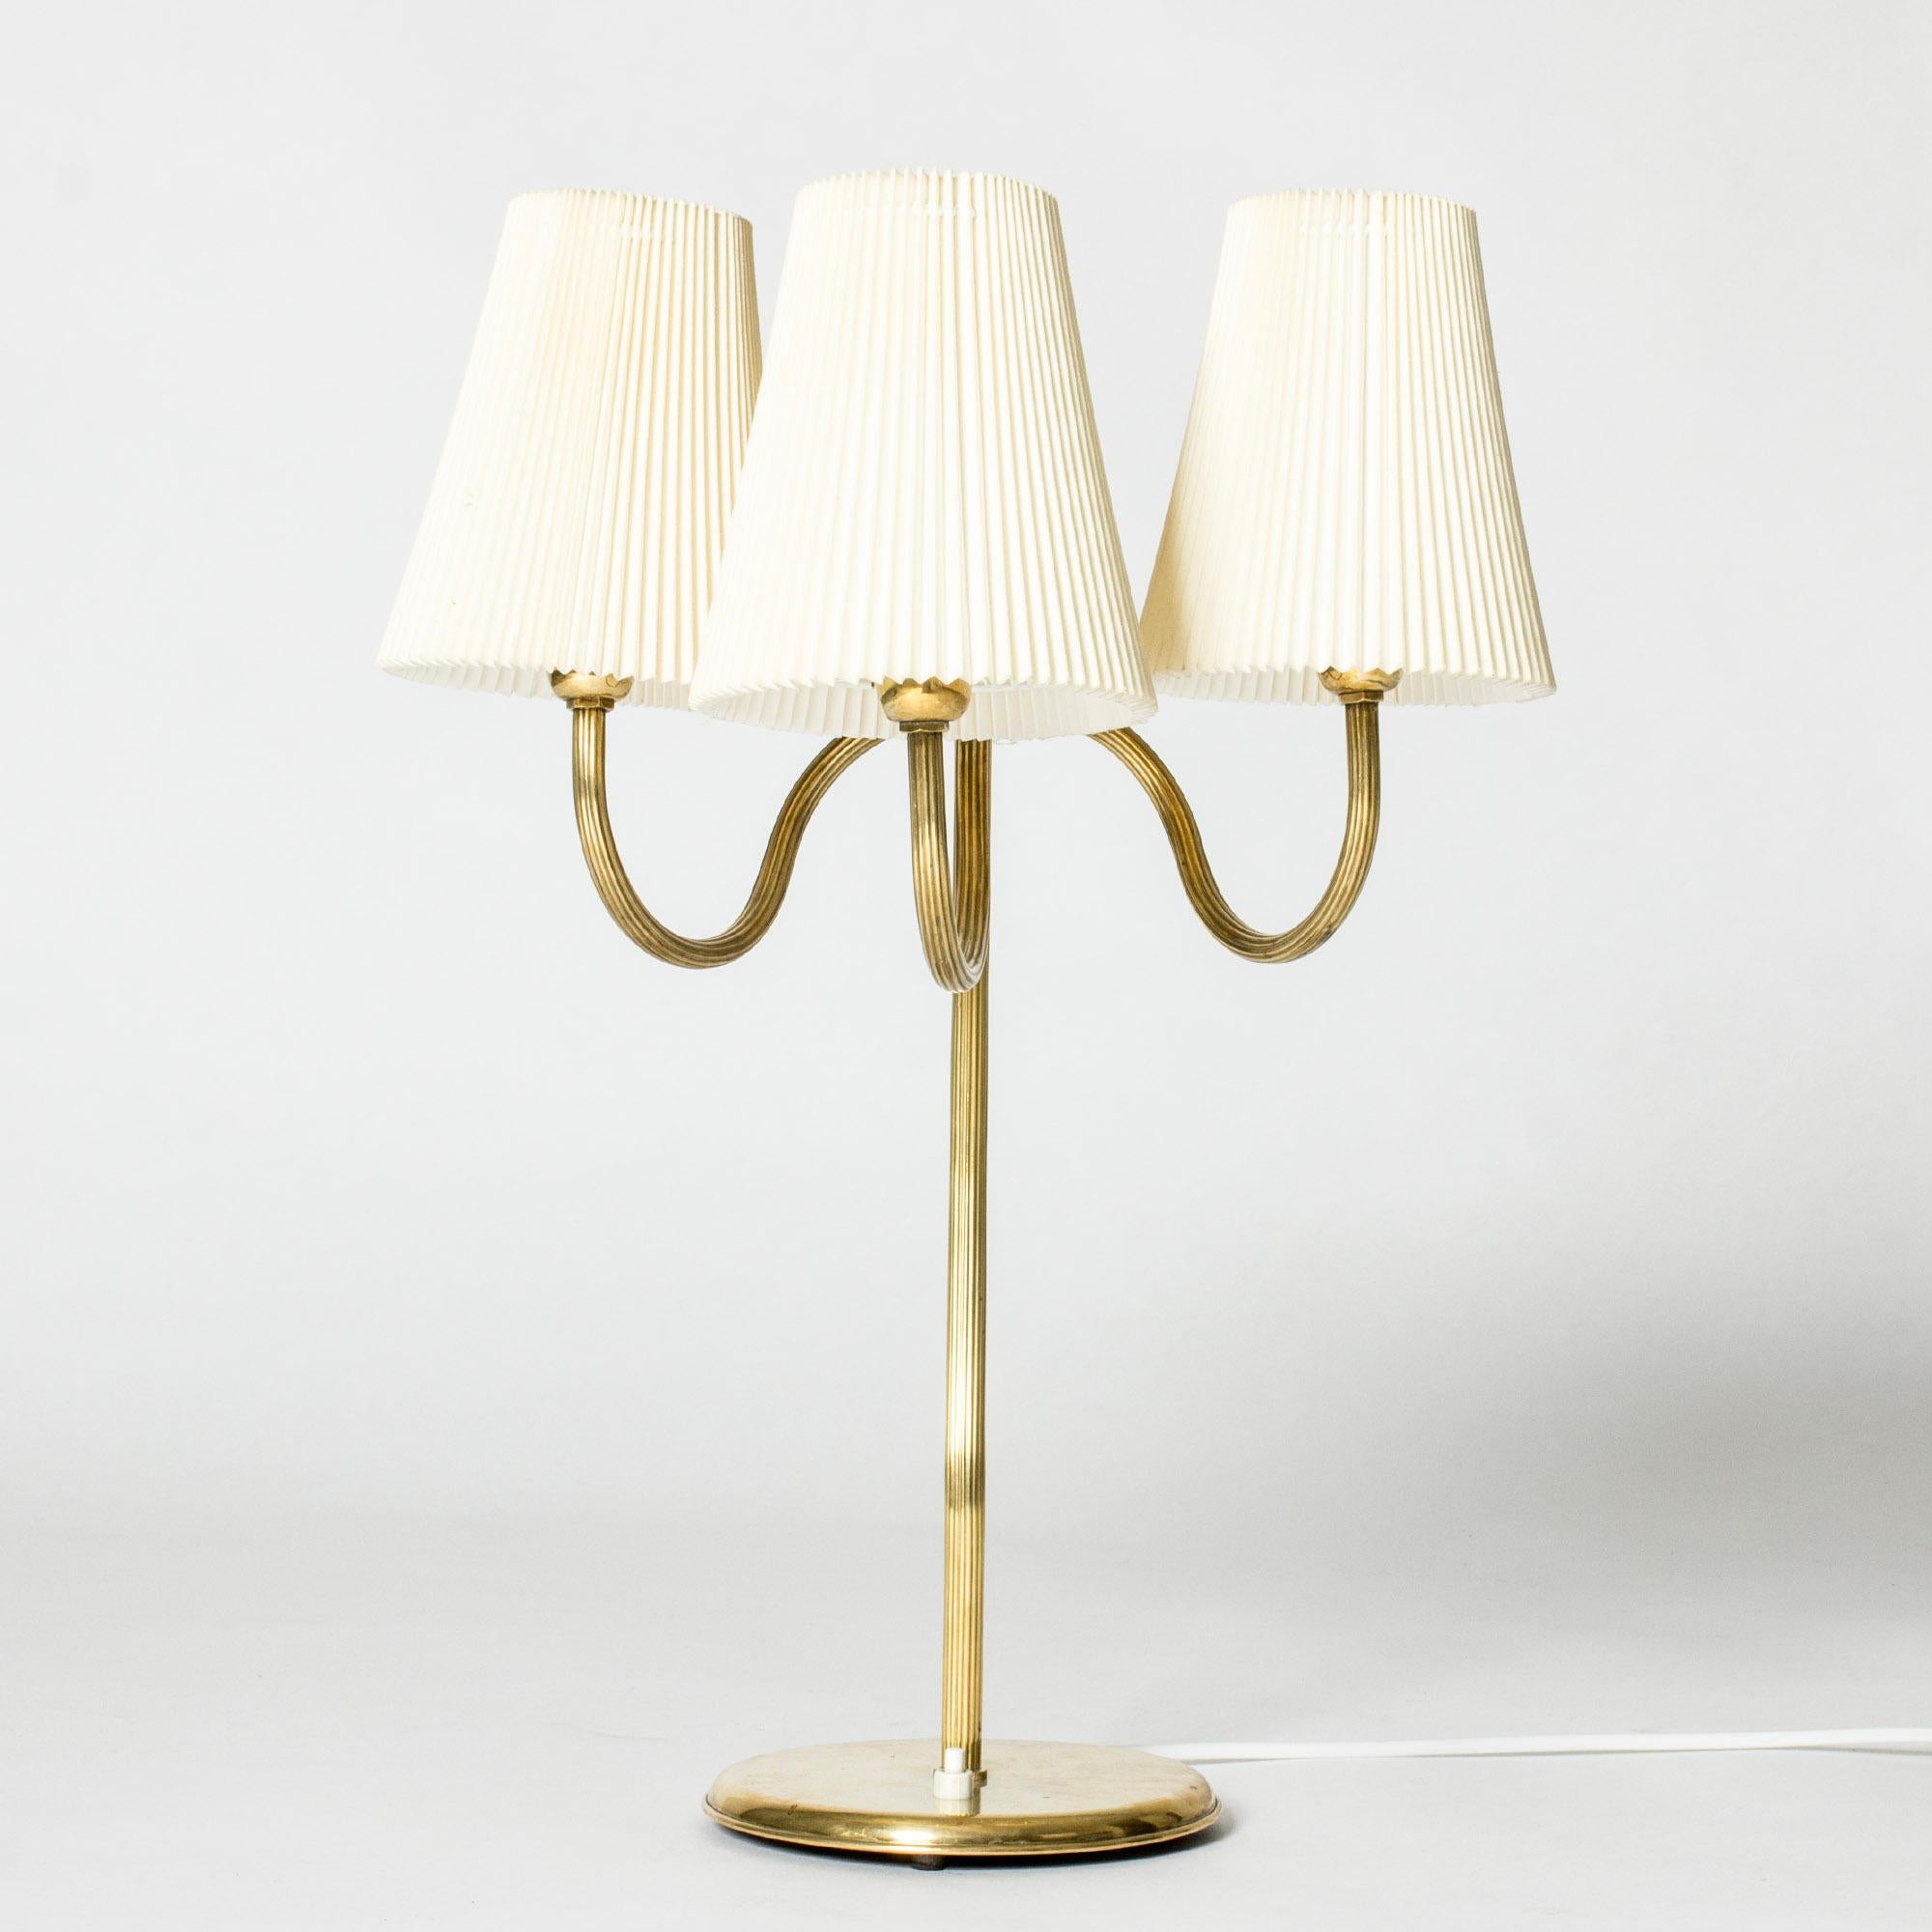 Beautiful Swedish Modern table lamp, made from brass in a slender, sculptural design with three twirled arms. Embossed stripes, three original wreathed shades.